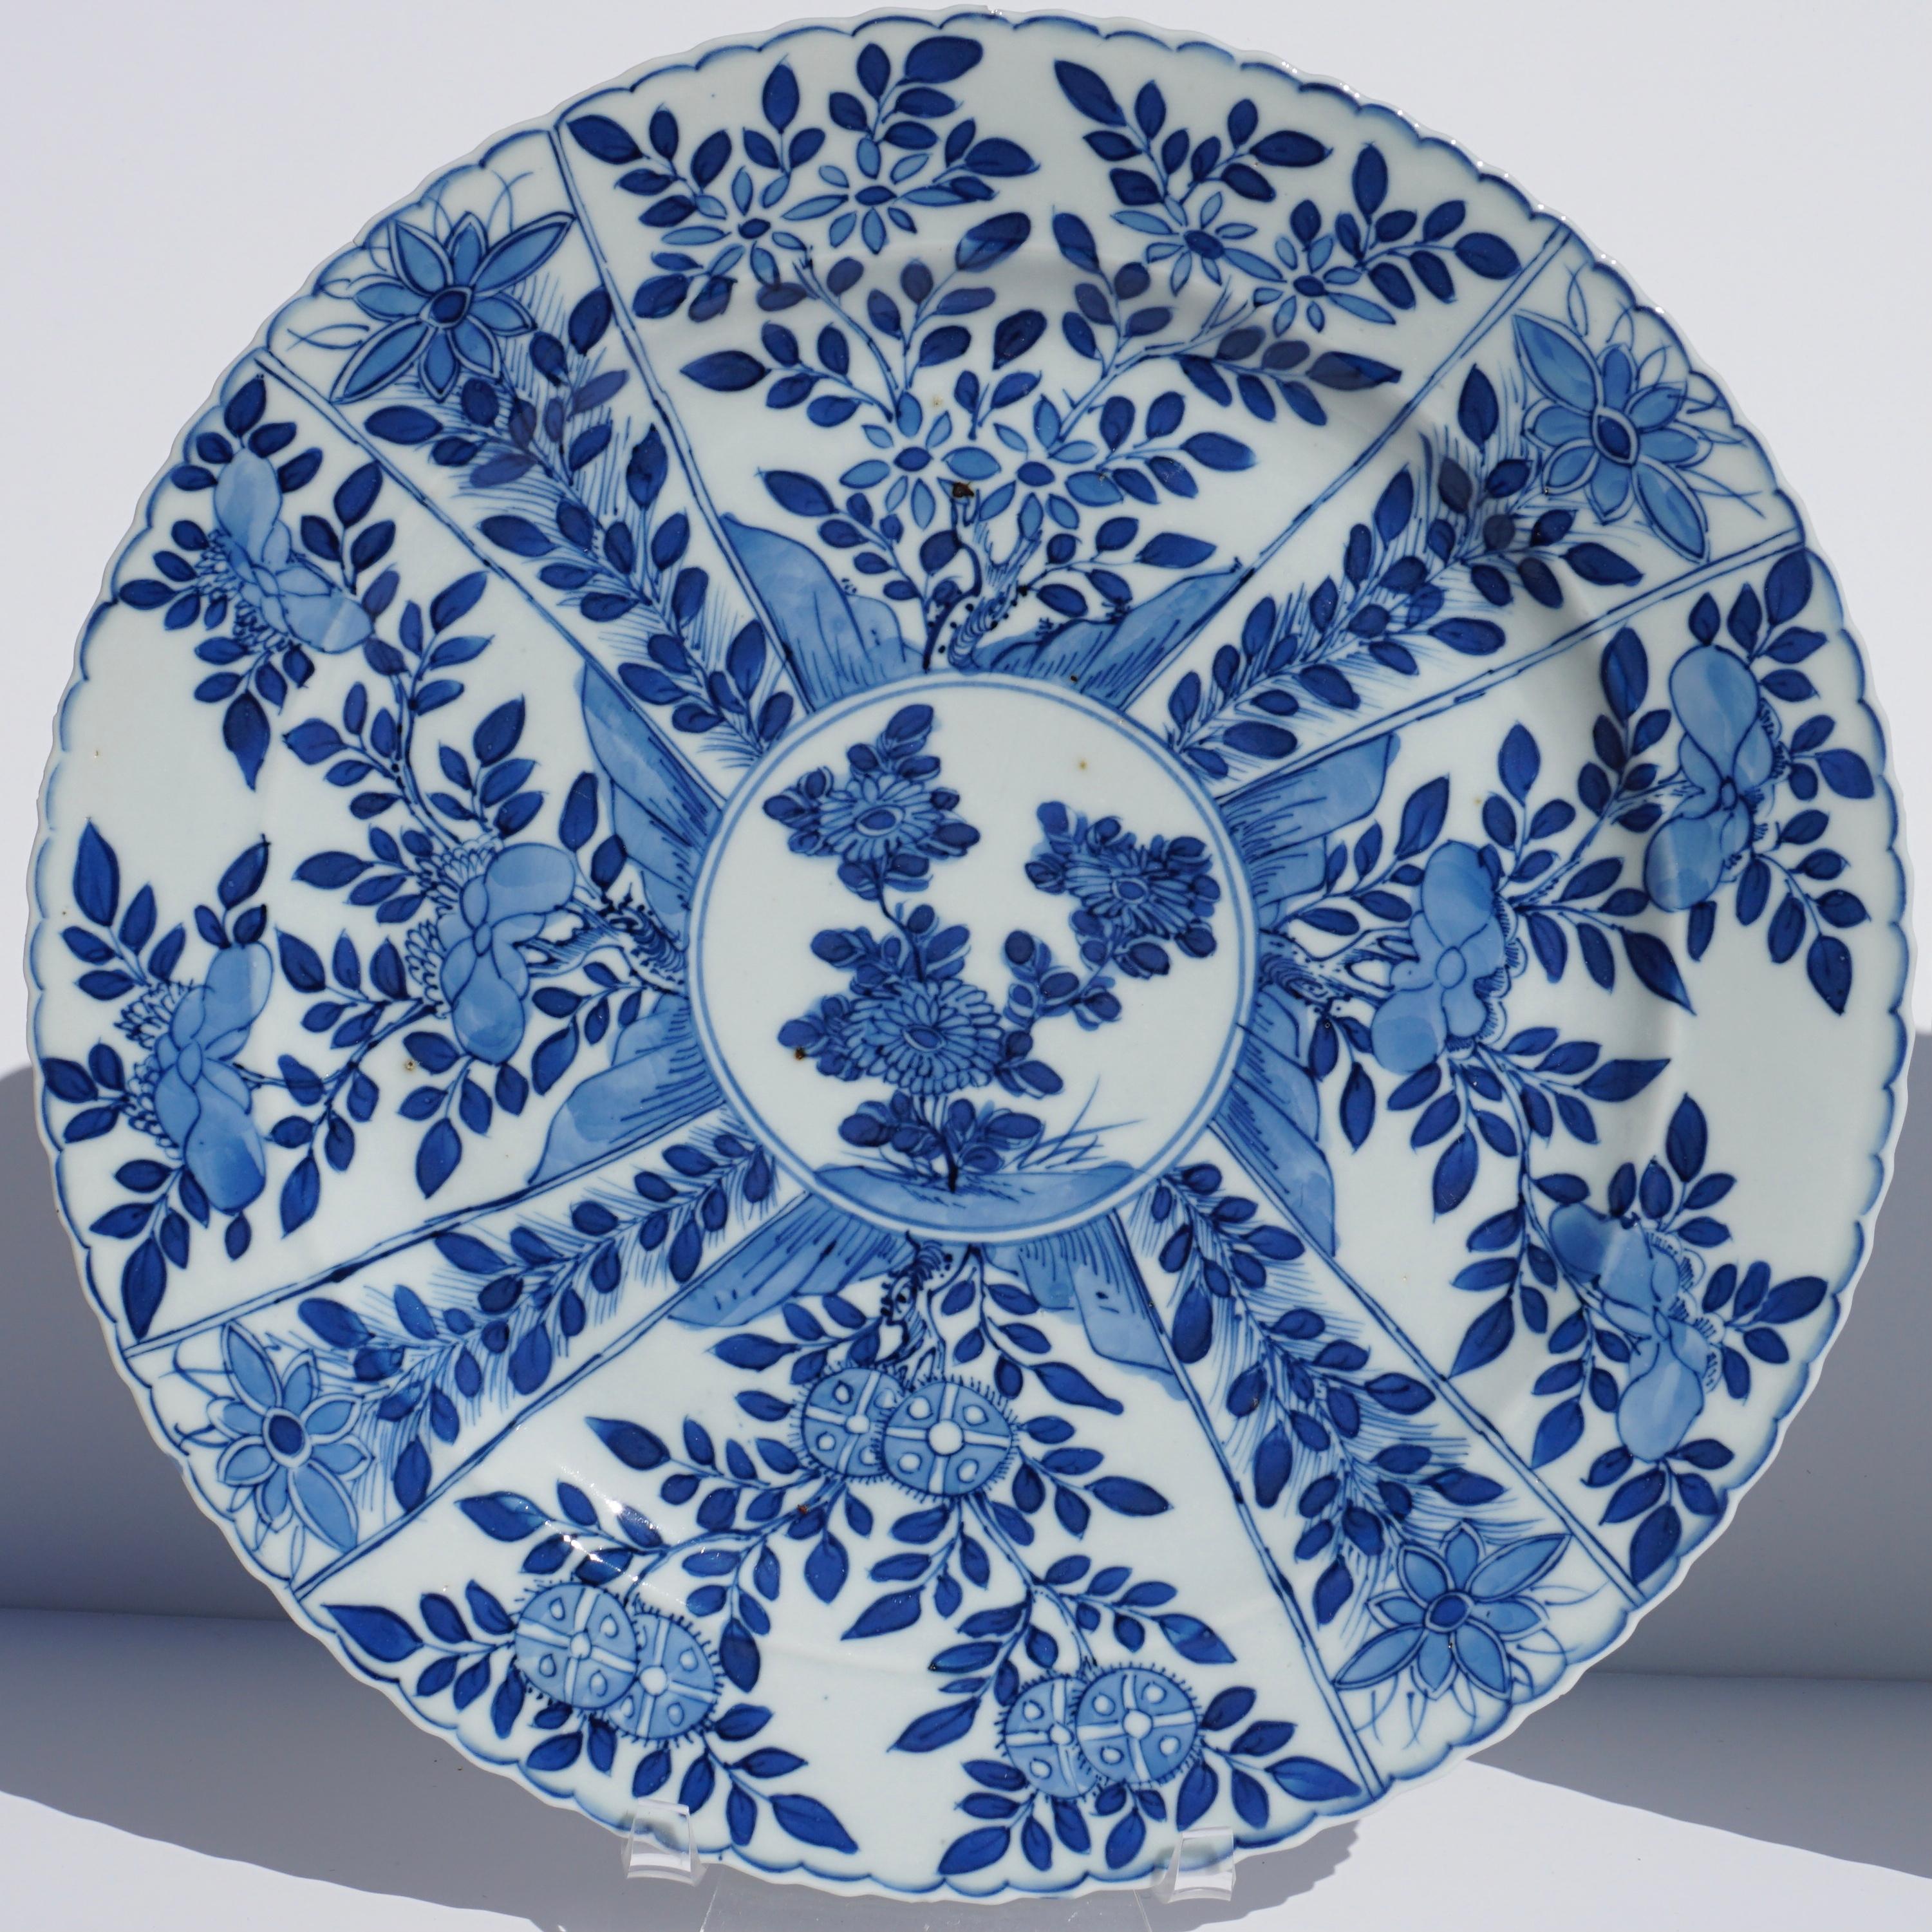 Chinese Export 18th Century Chinese Porcelain Blue and White Plates '2' Qing, Ca 1780